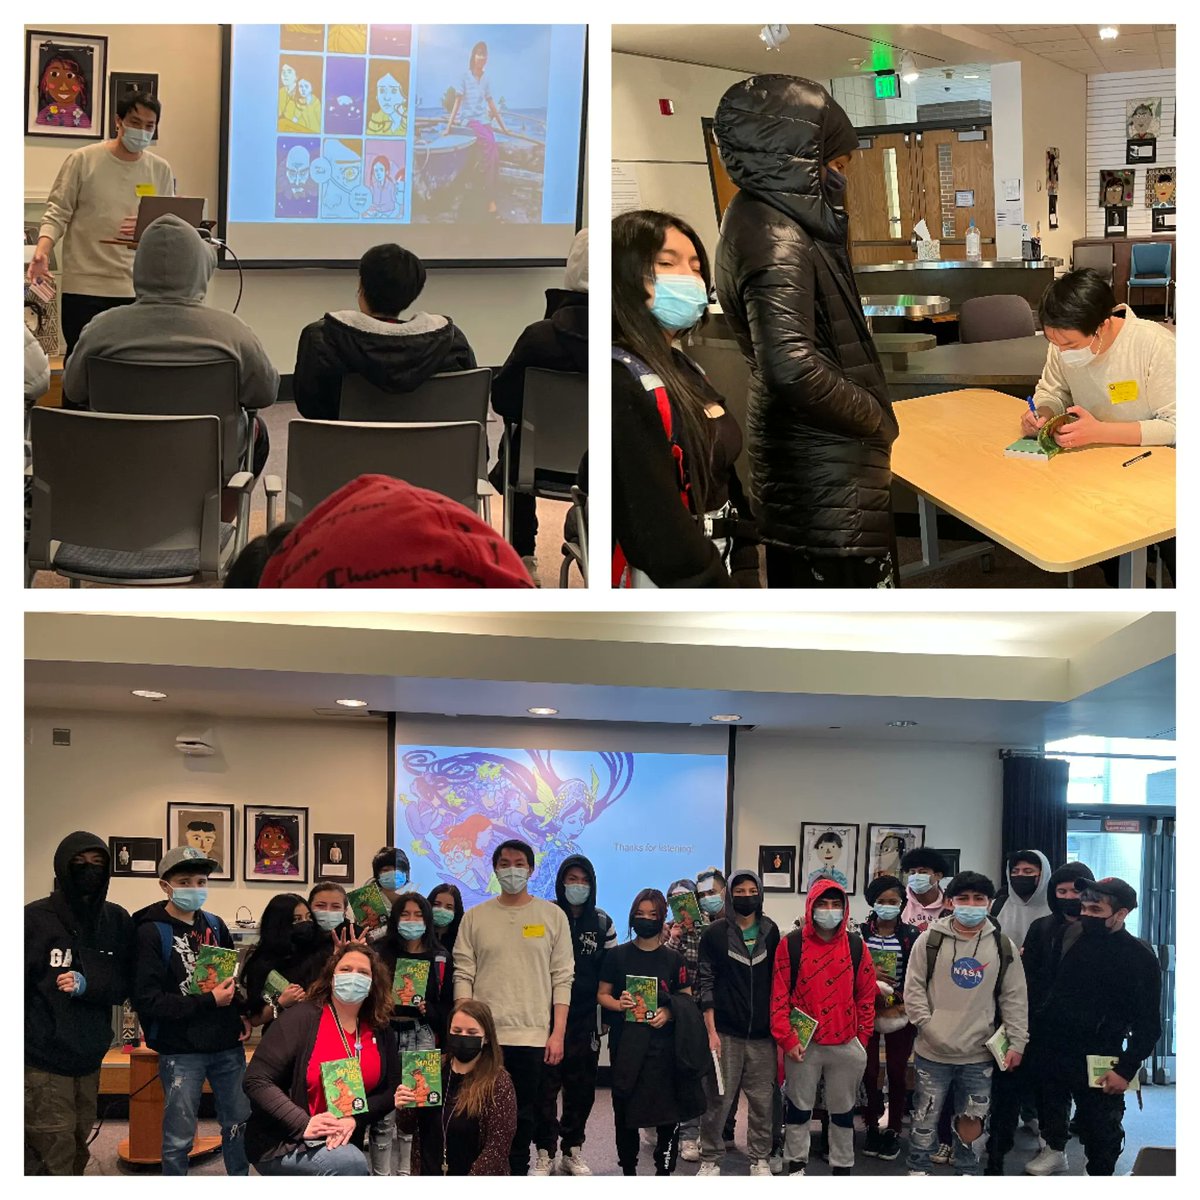 Washington students participating in ReadBrave listen to local author Trung Le Nguyen talk about his graphic novel, The Magic Fish. @Trungles